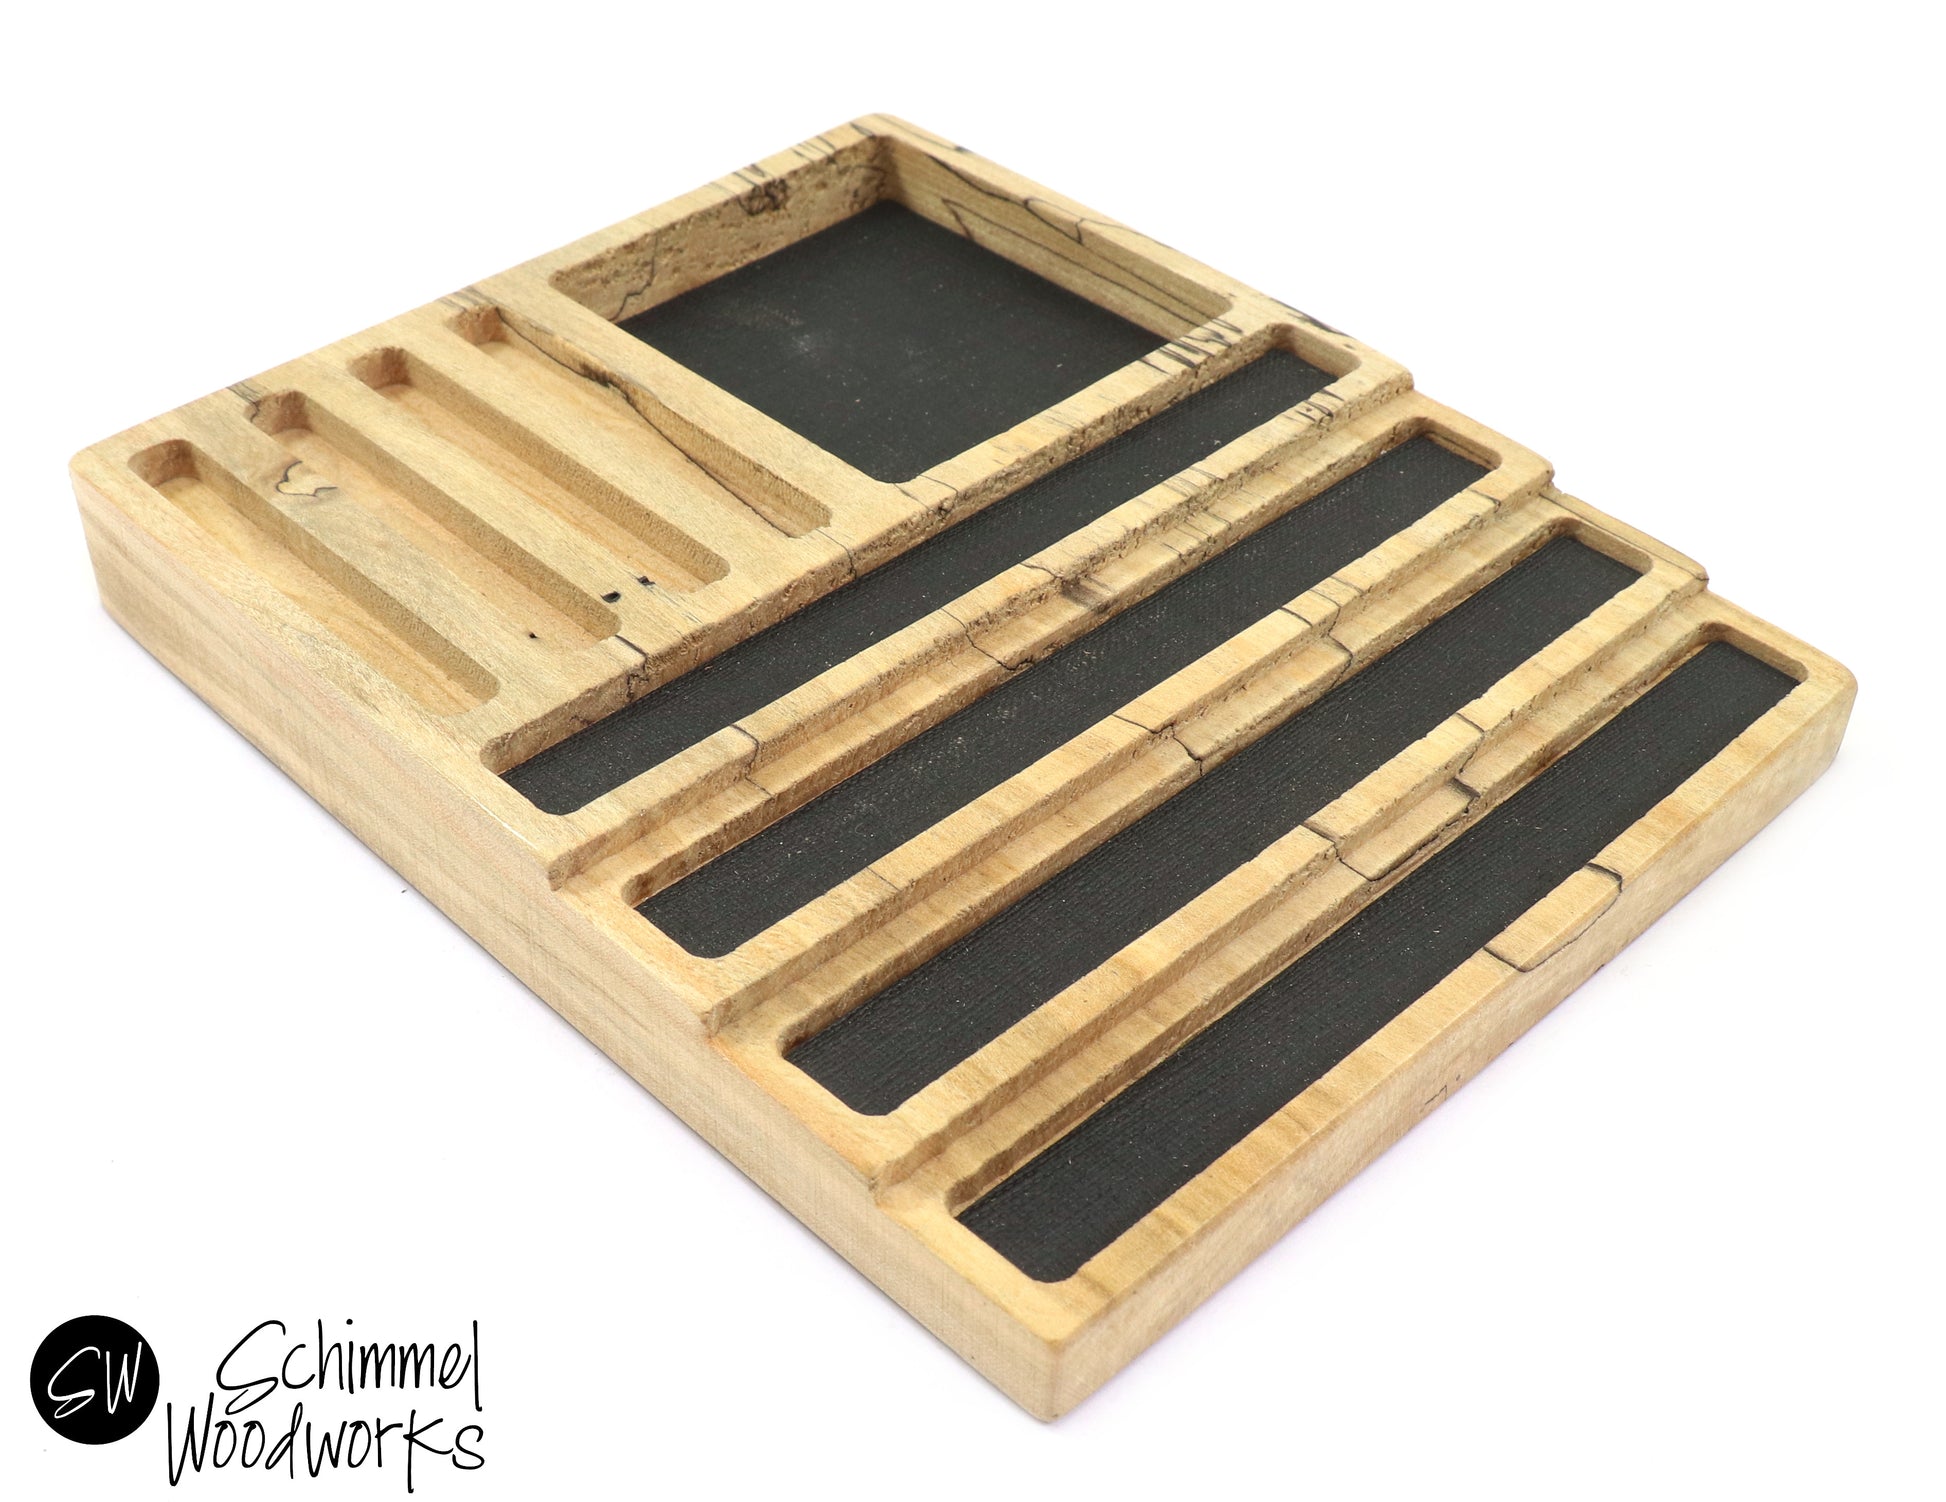 Pen tray by e15 in the shop